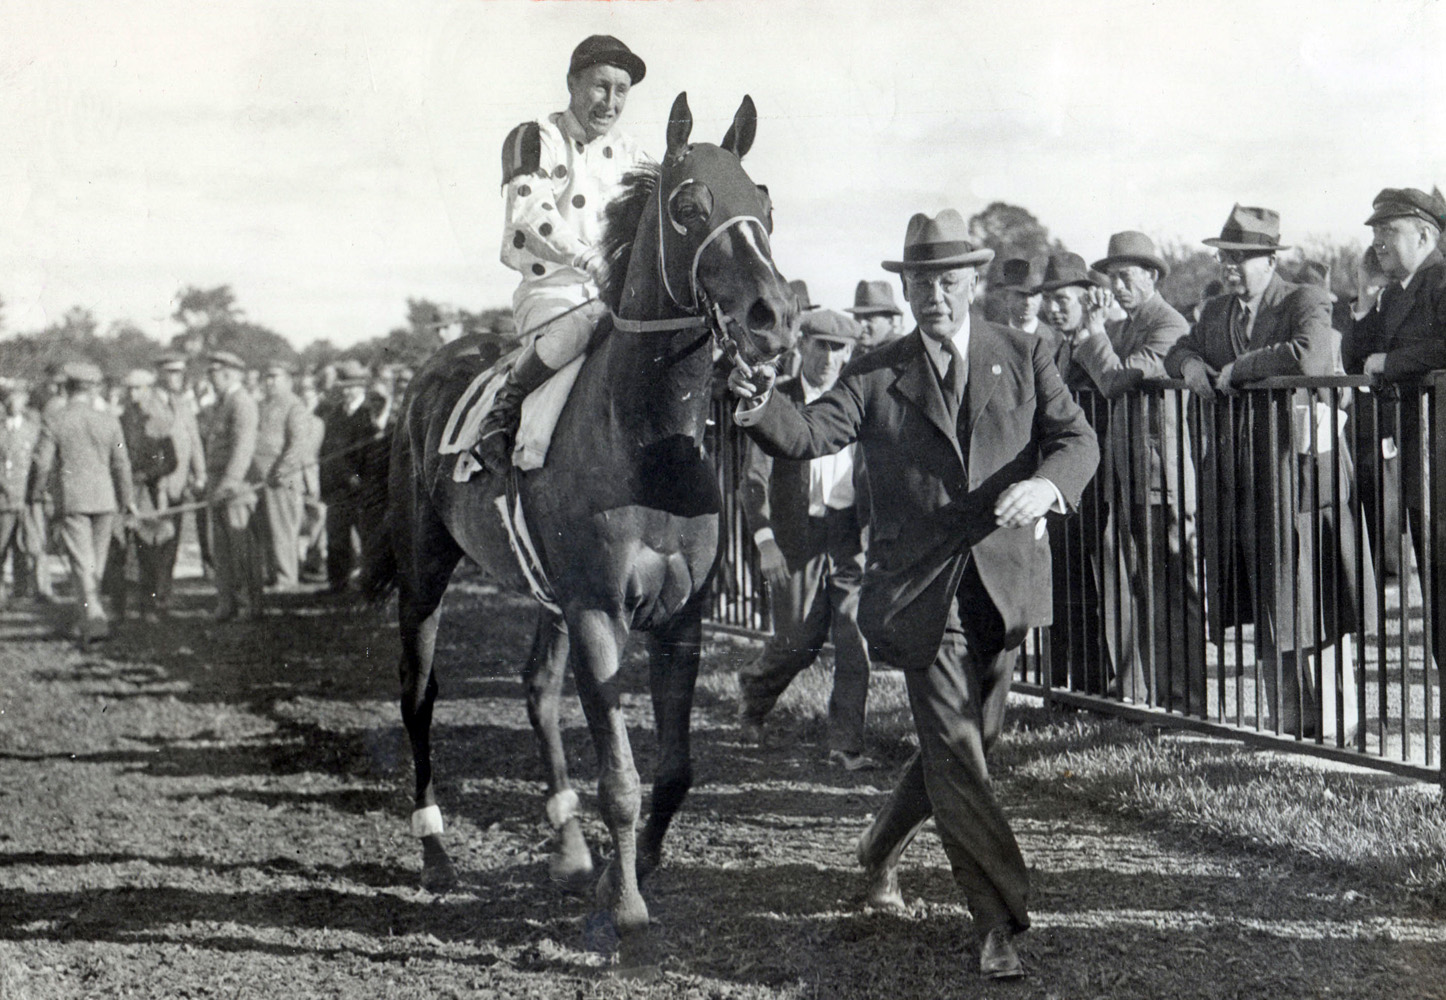 William Woodward, Sr. leads in Granville (James Stout up) after winning a race (Museum Collection)